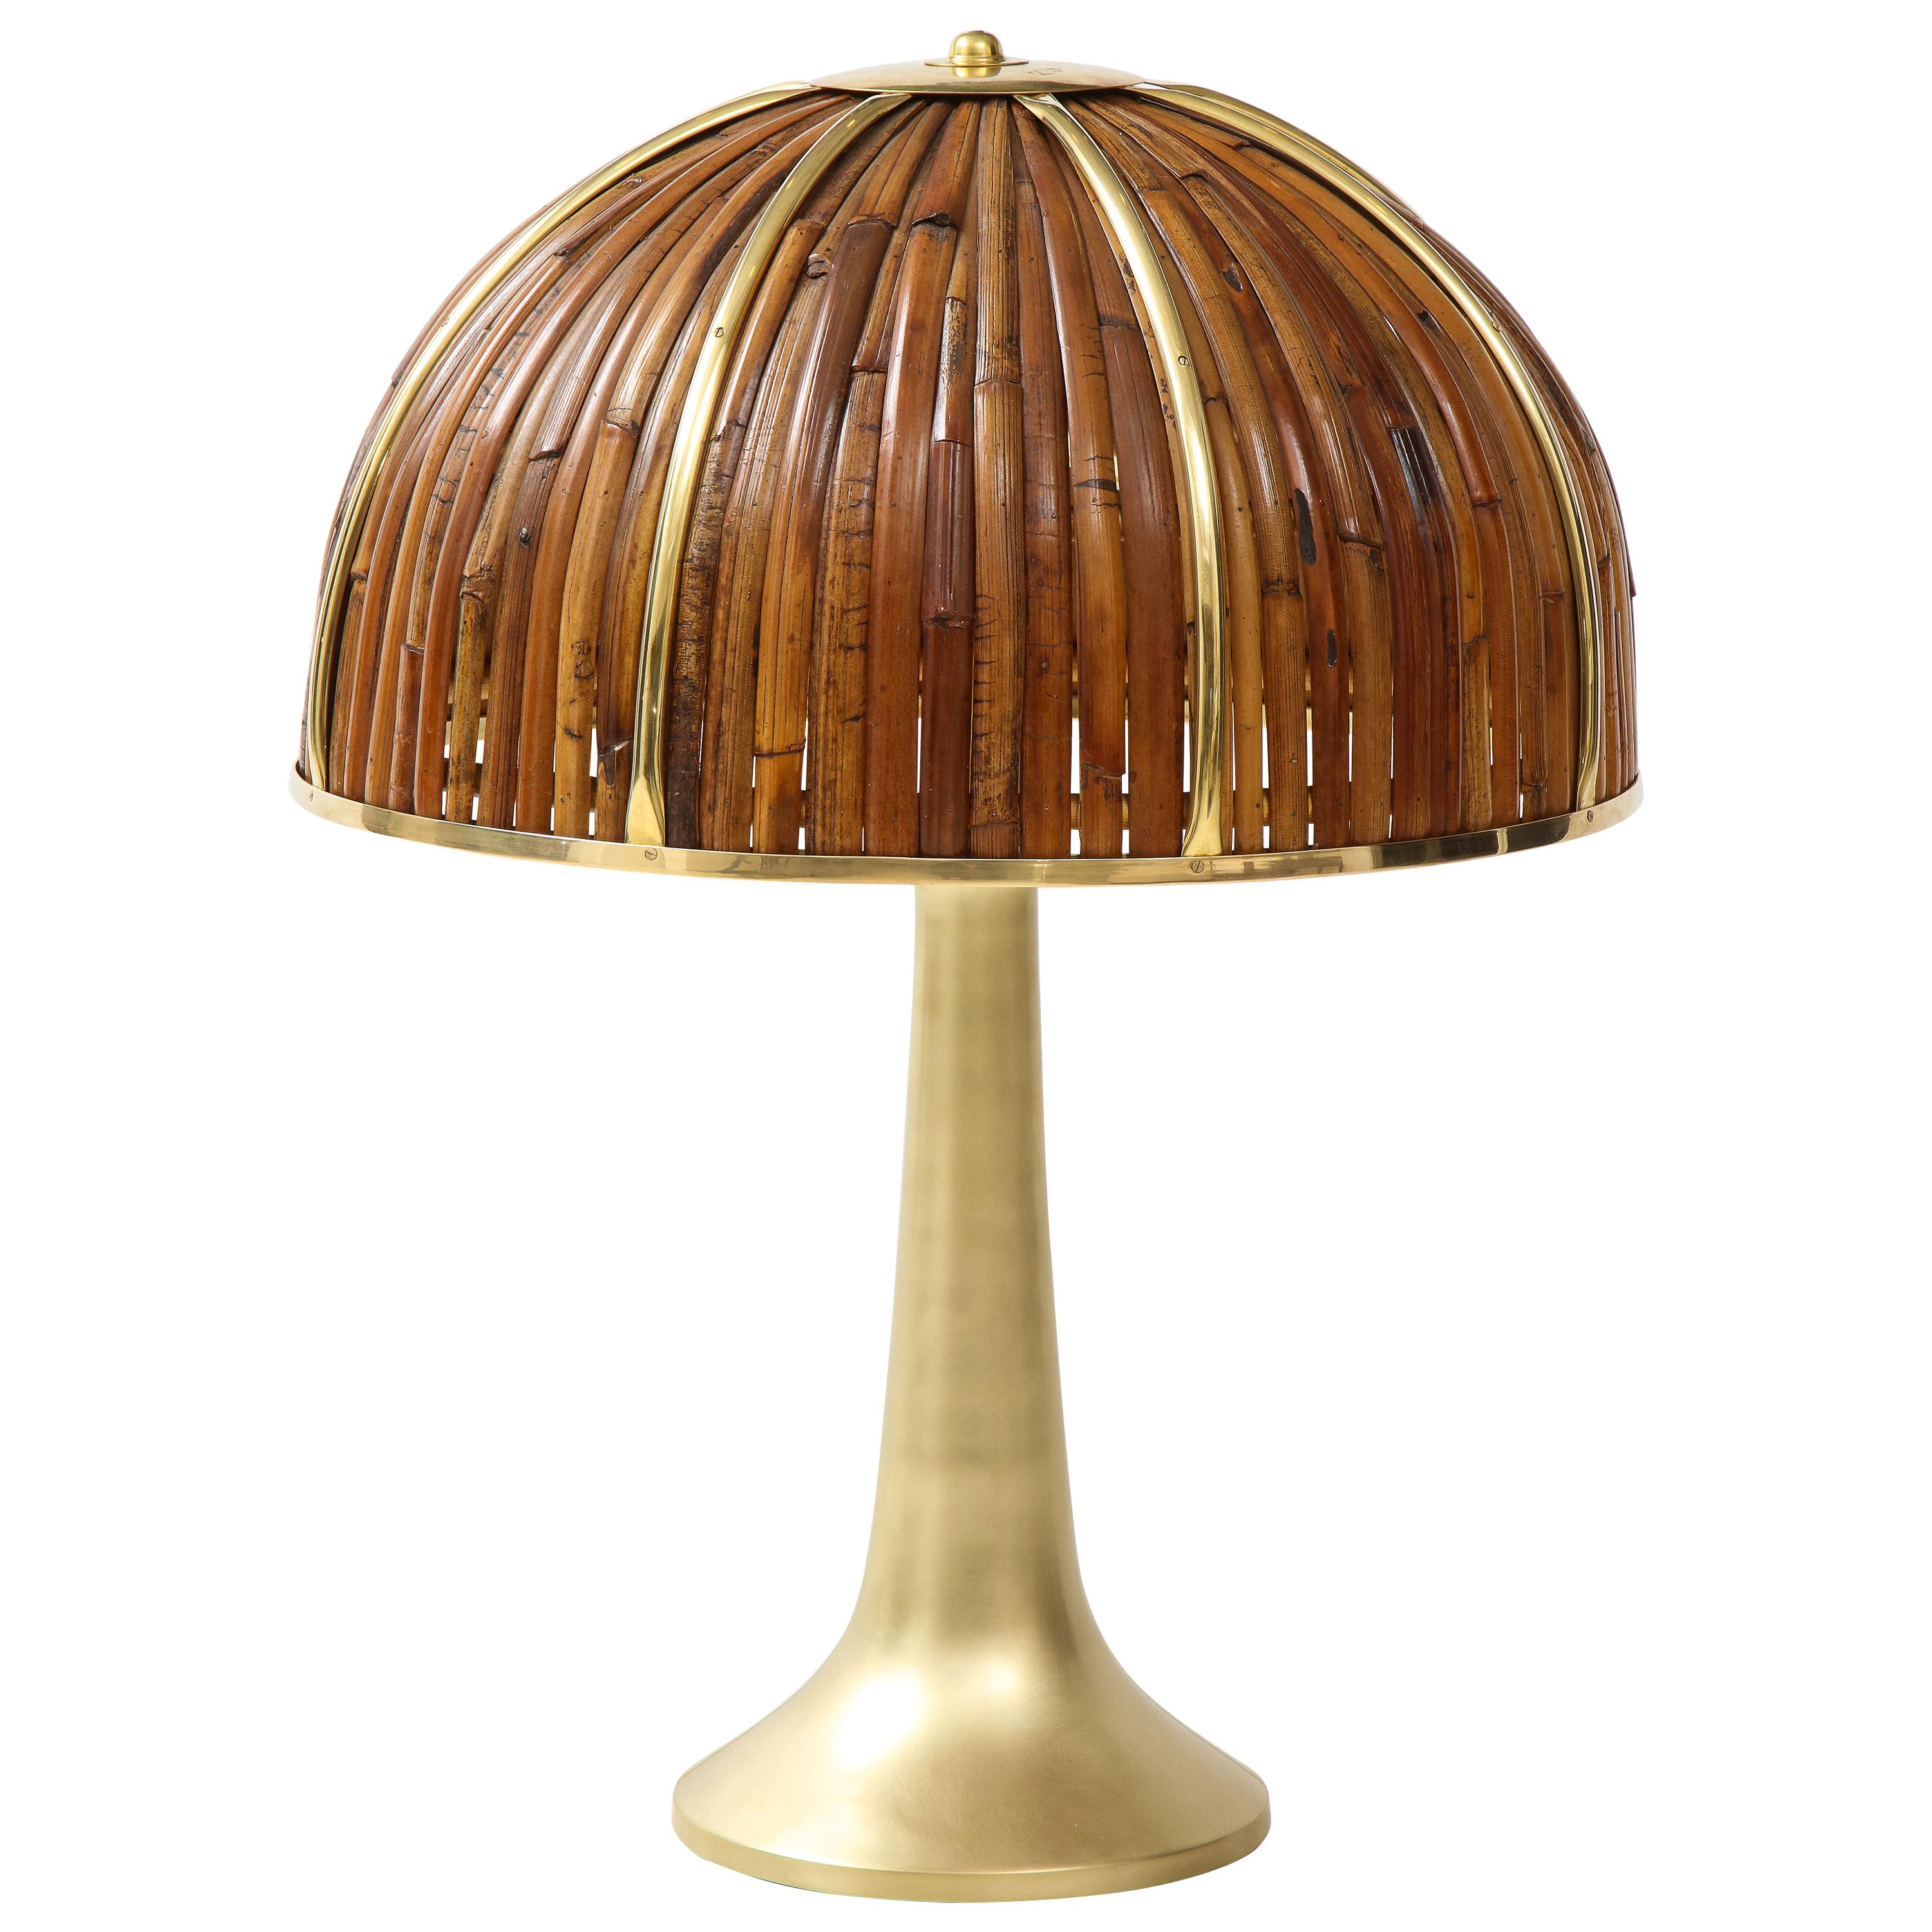 Gabriella Crespi Large Bamboo and Brass 'Fungo' Table Lamp